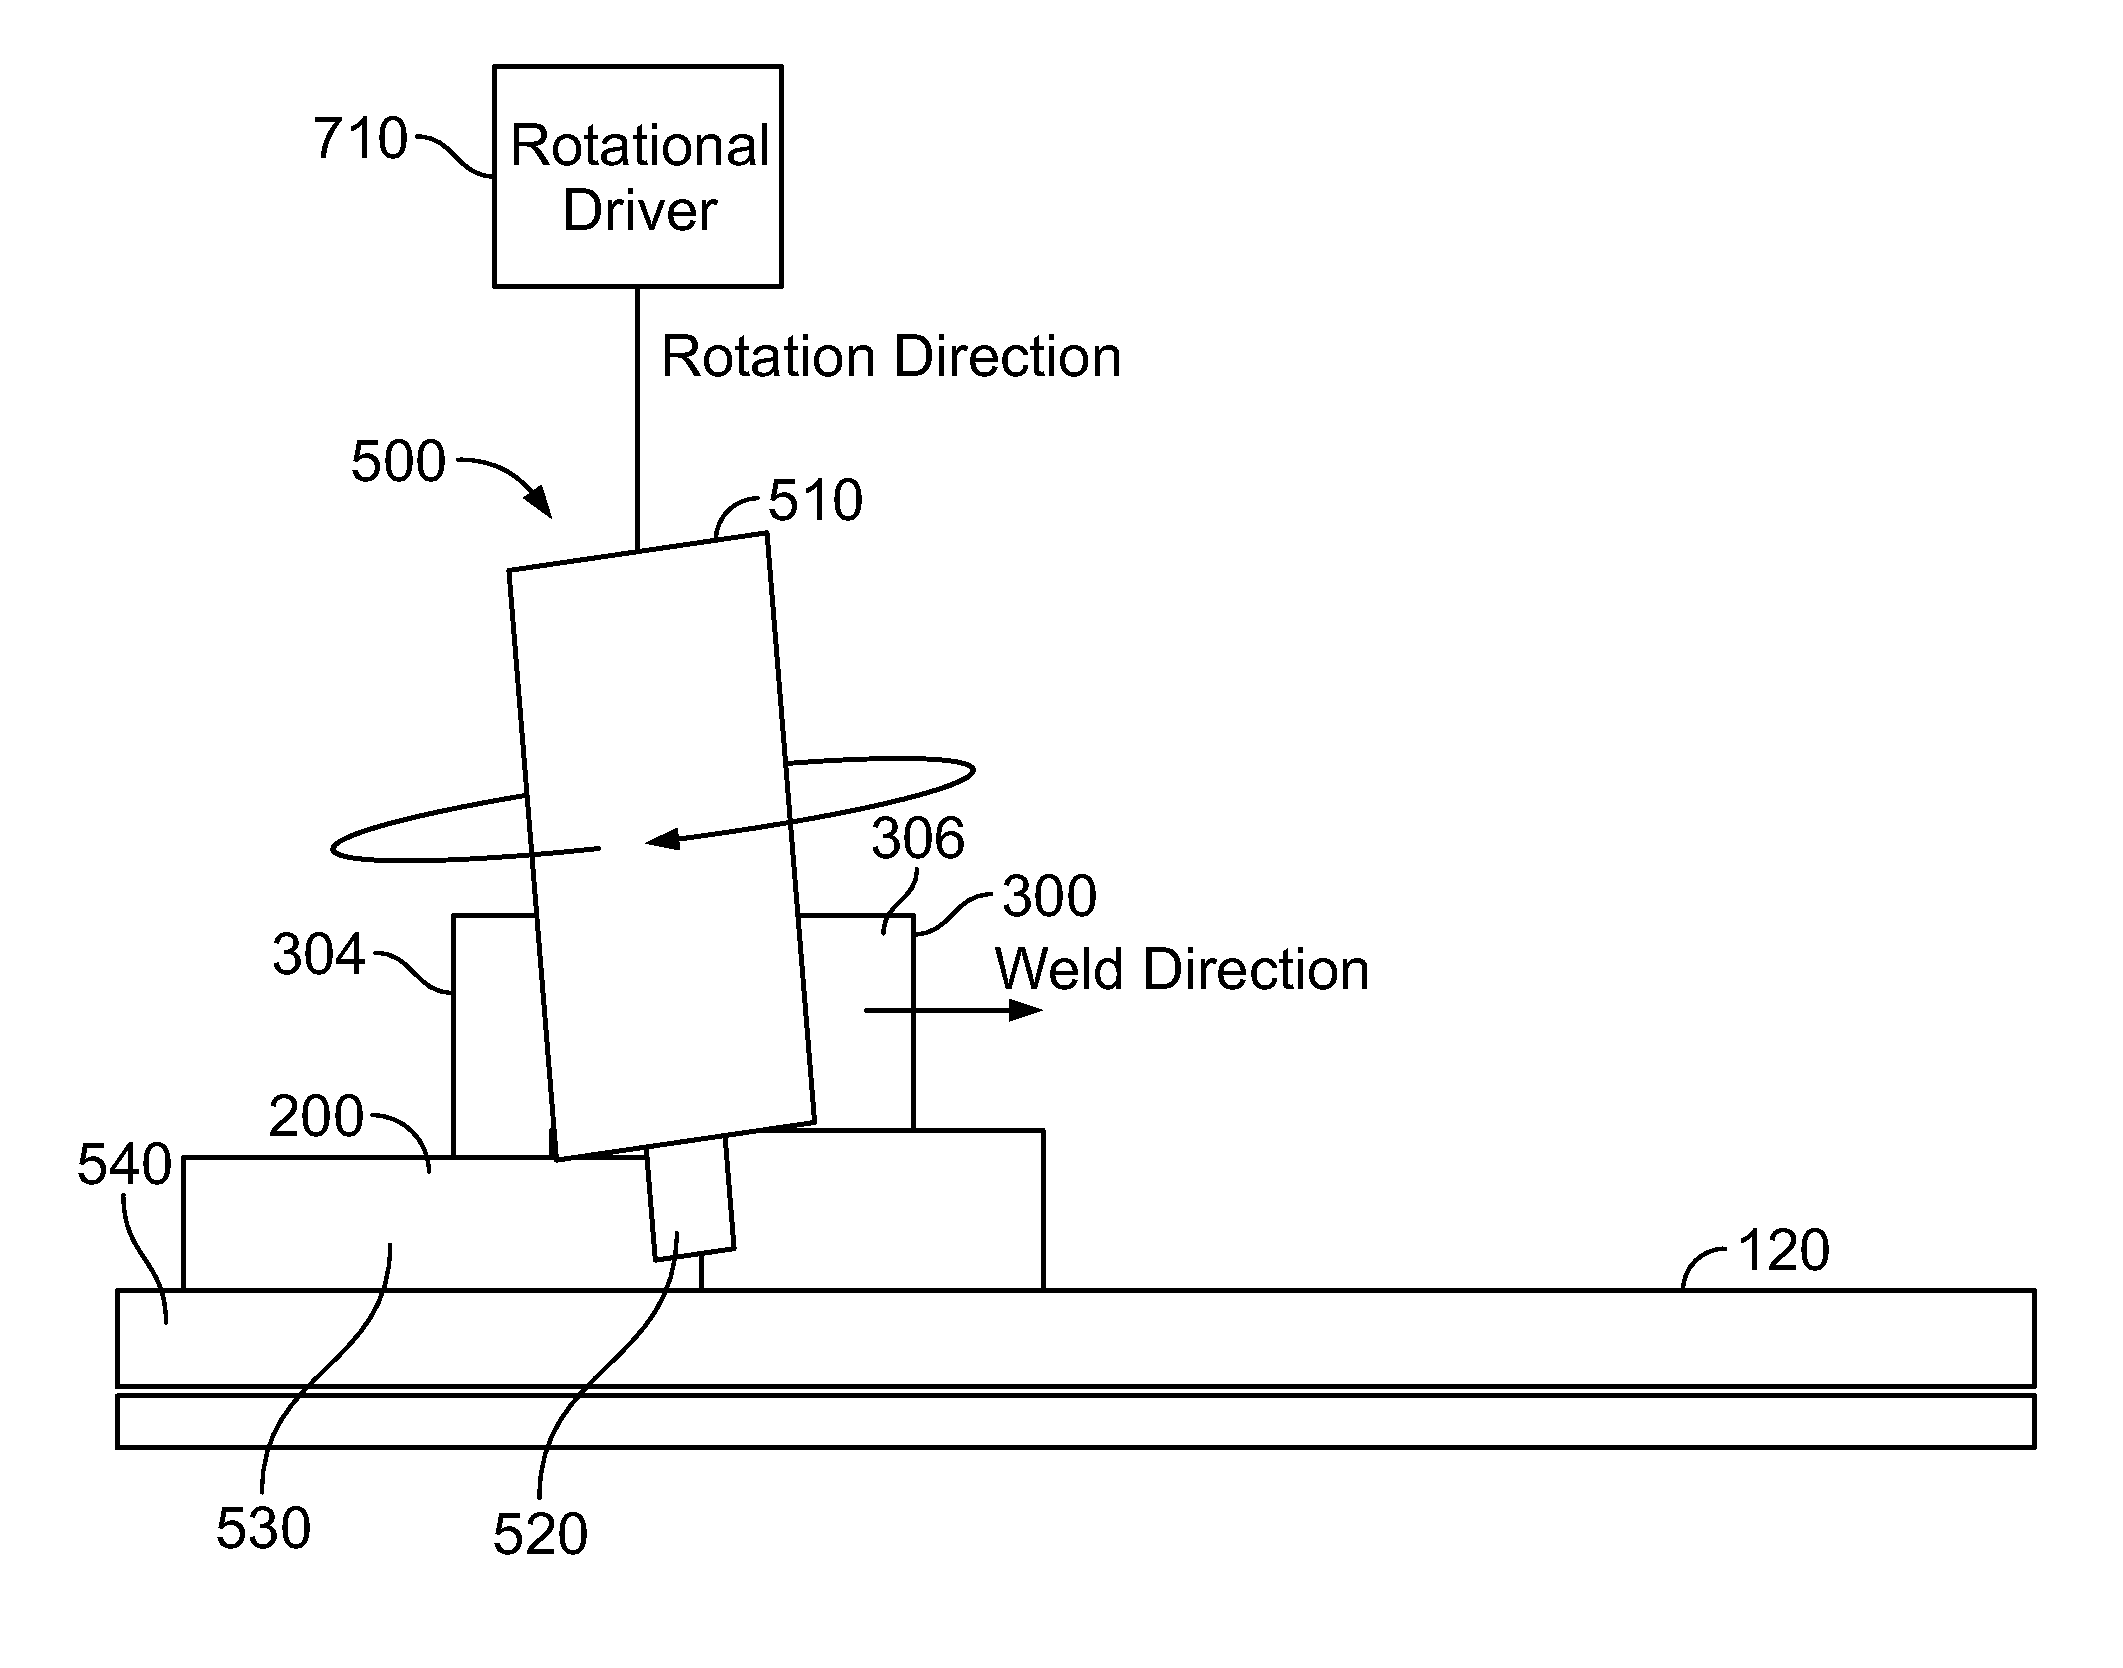 Method and apparatus for friction stir welding tube ends for a heat exchanger